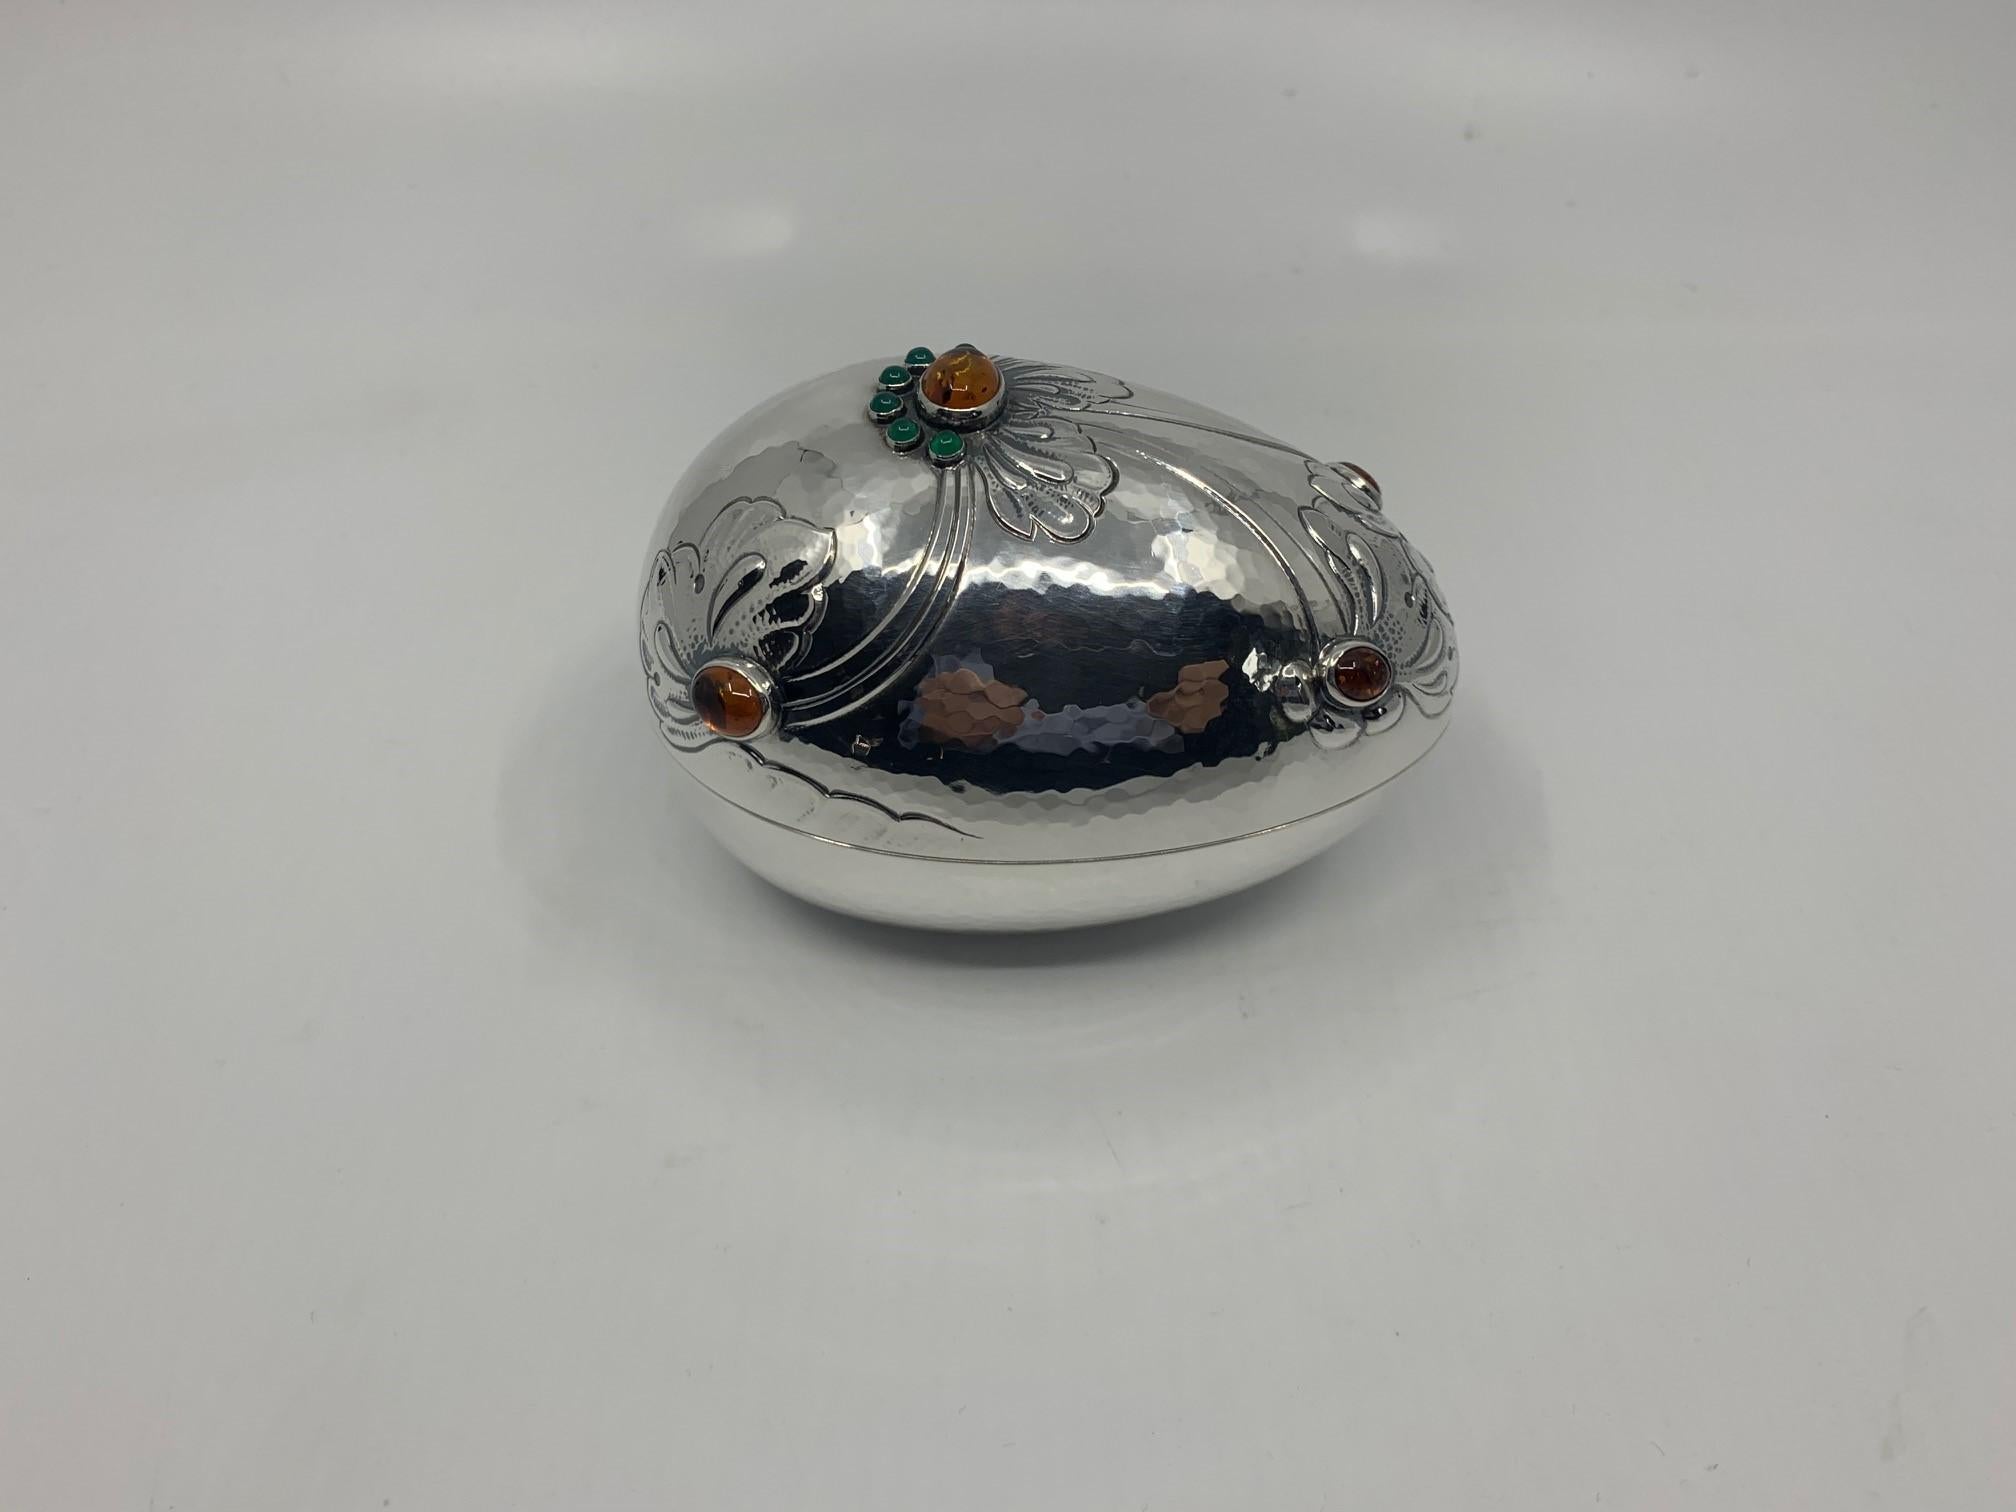 Oval Georg Jensen bonbonnière decorated with green agate and amber stones and beautiful hand-chased floral details. A small piece of hollowware that resembles a piece of jewelry.

Item number: 3522201

Stones: Green agate, Amber
Material: